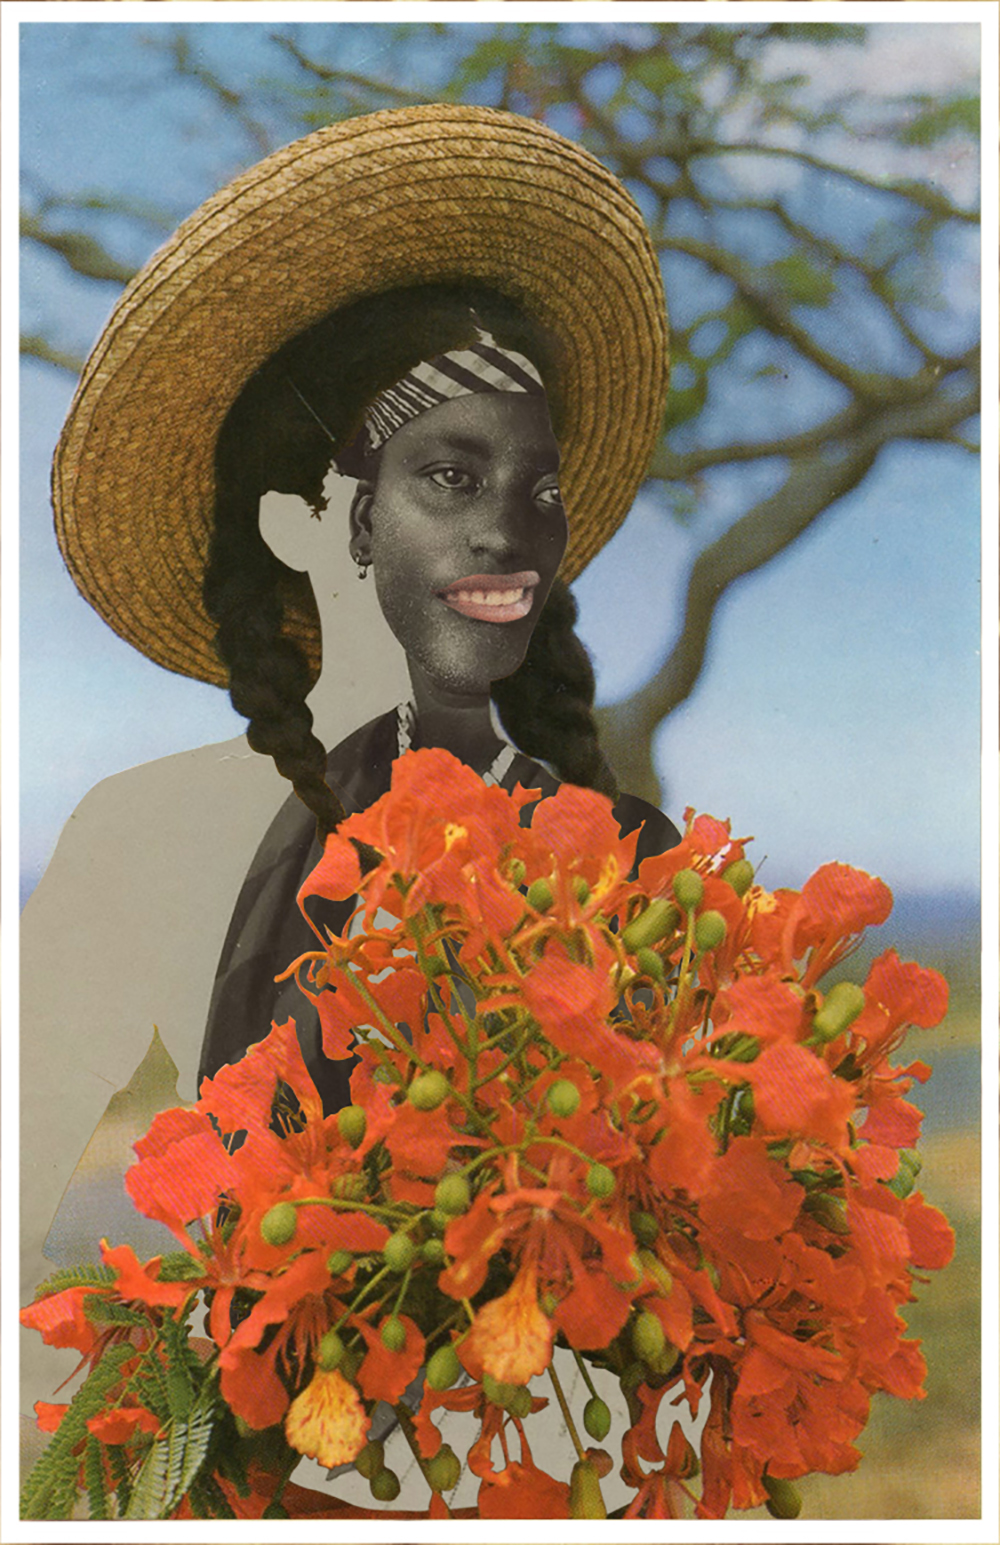 05_Ayoowiri or Girl with poinciana flowers, 2020, Archival print on Hahnemuhle FineArt Pearl paper, 11 x 17